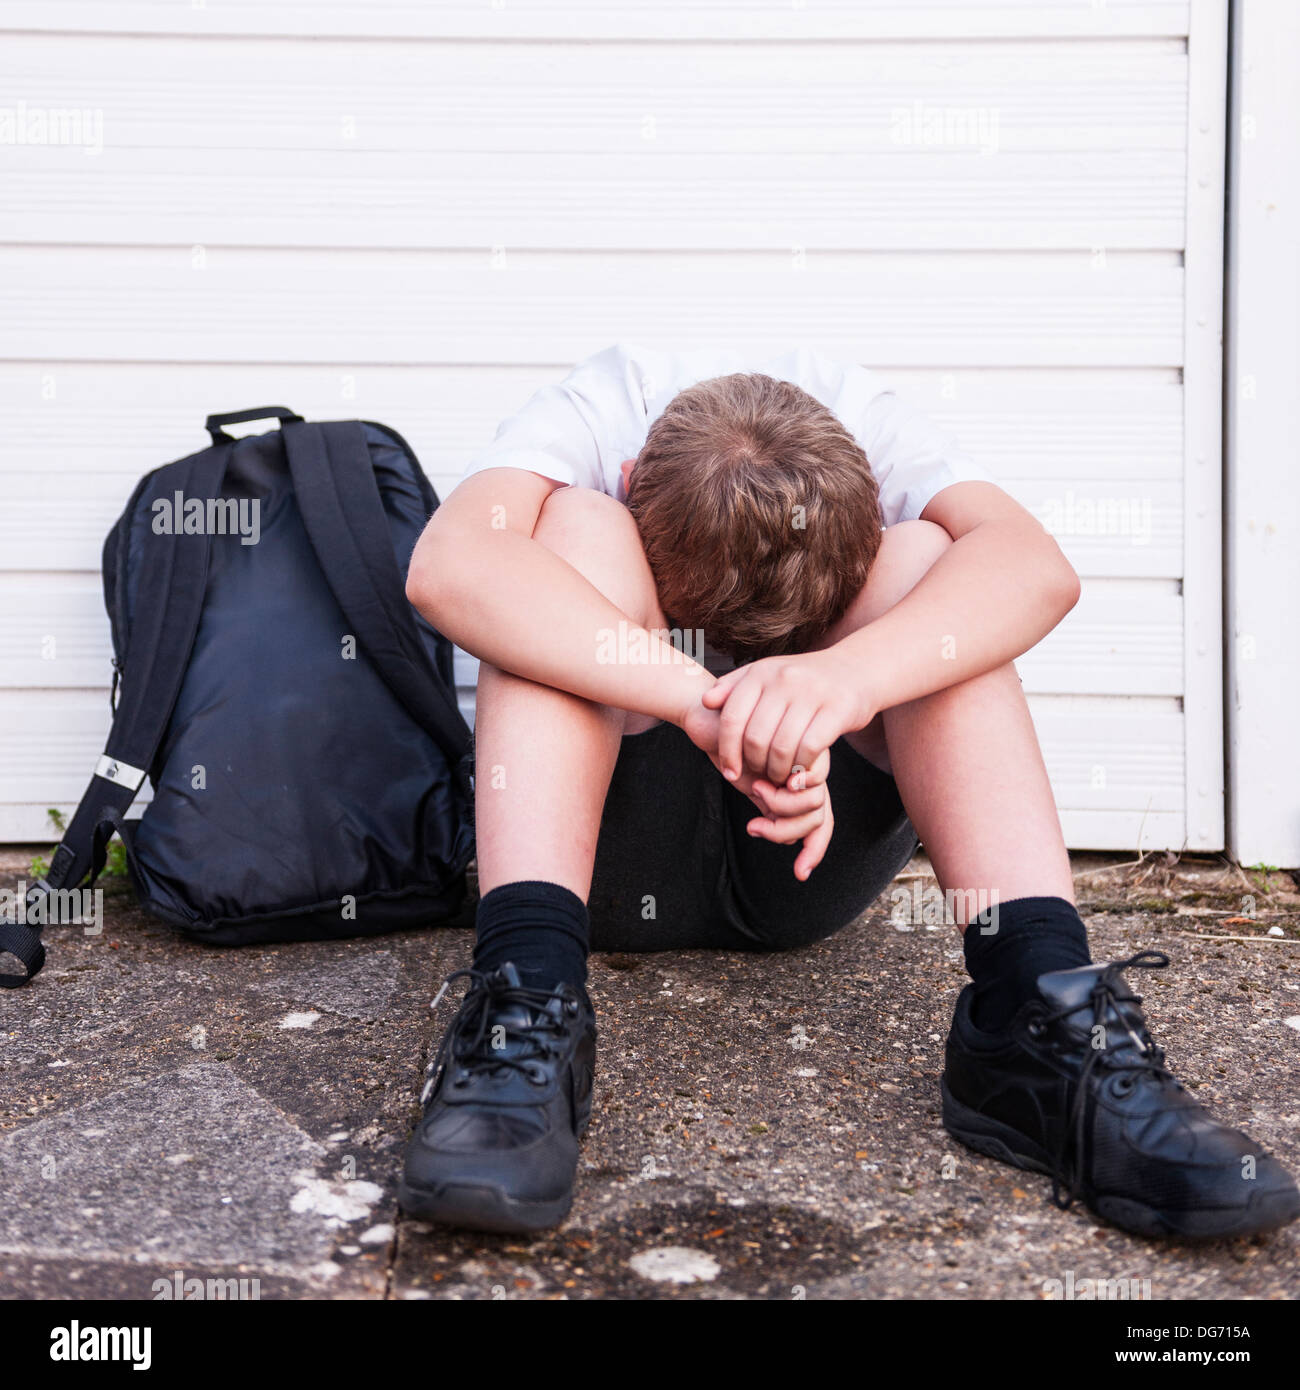 A boy of 10 looking sad and depressed in his school uniform showing the effects of bullying in the Uk Stock Photo